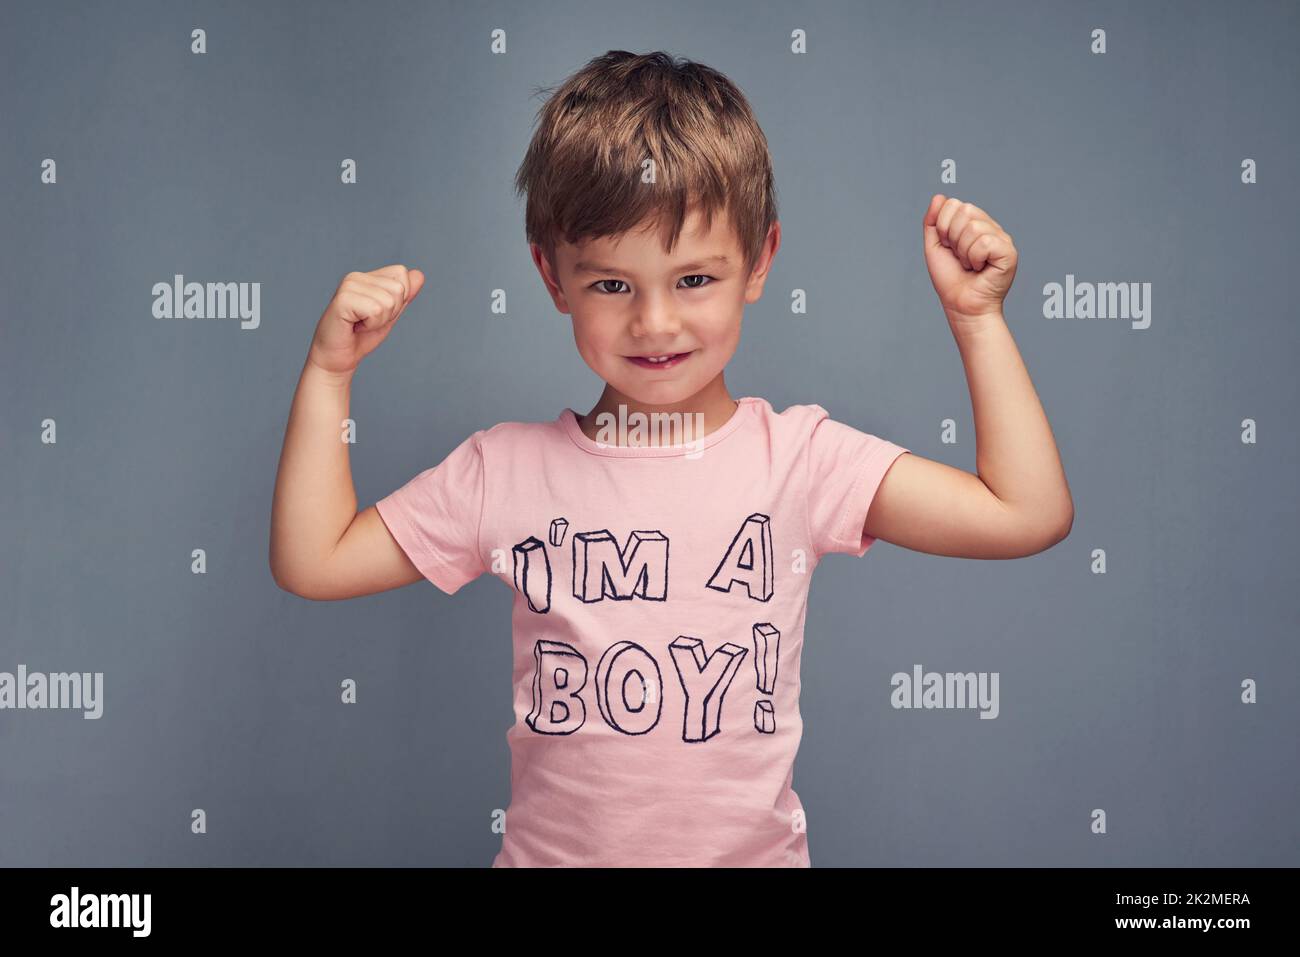 Tough guys wear pink. Studio portrait of a cheering boy wearing a shirt with Im a boy printed on it against a gray background. Stock Photo